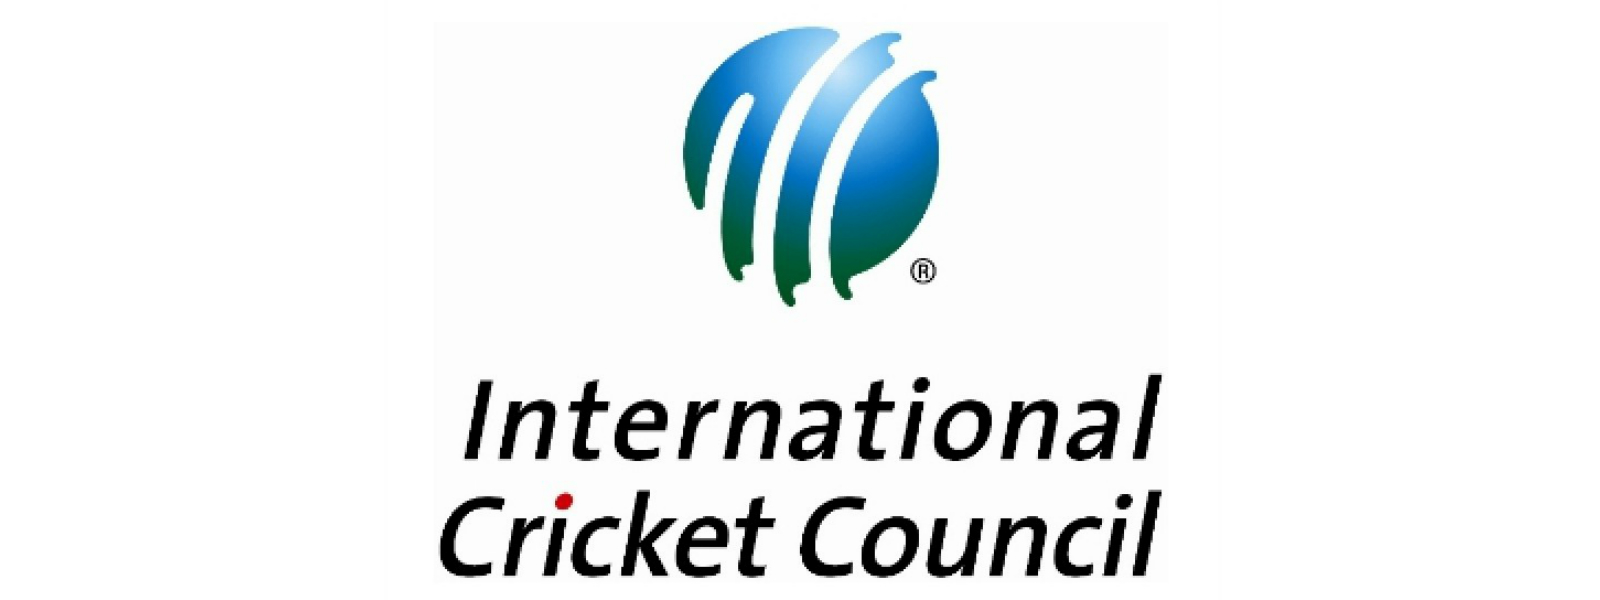 USA Cricket announced as the ICC's 105th member